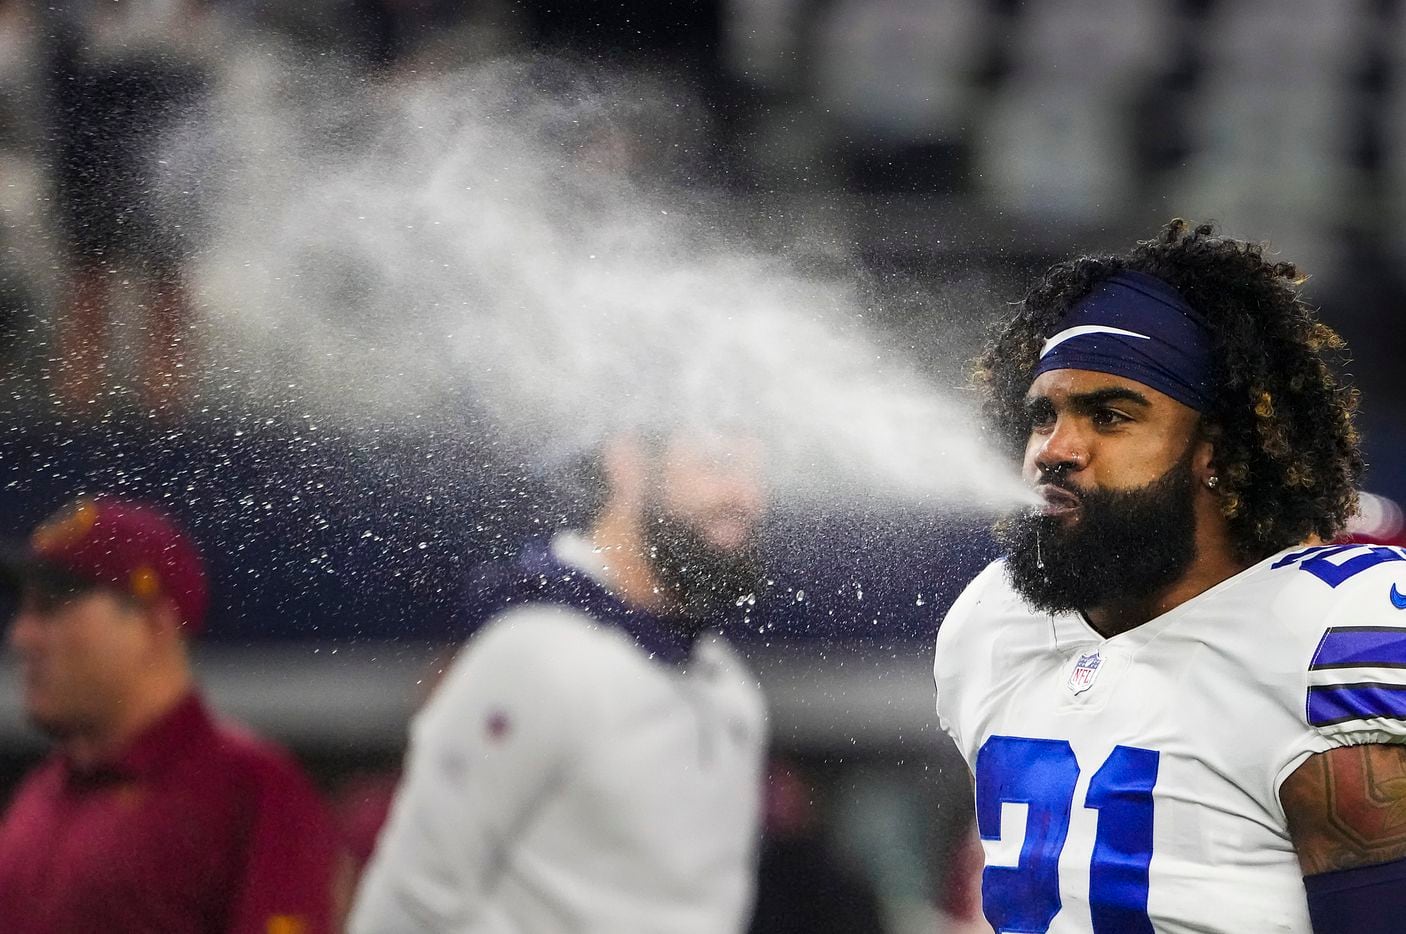 Dallas Cowboys running back Ezekiel Elliott blows water while warming up before an NFL football game against the Washington Football Team at AT&T Stadium on Sunday, Dec. 26, 2021, in Arlington.